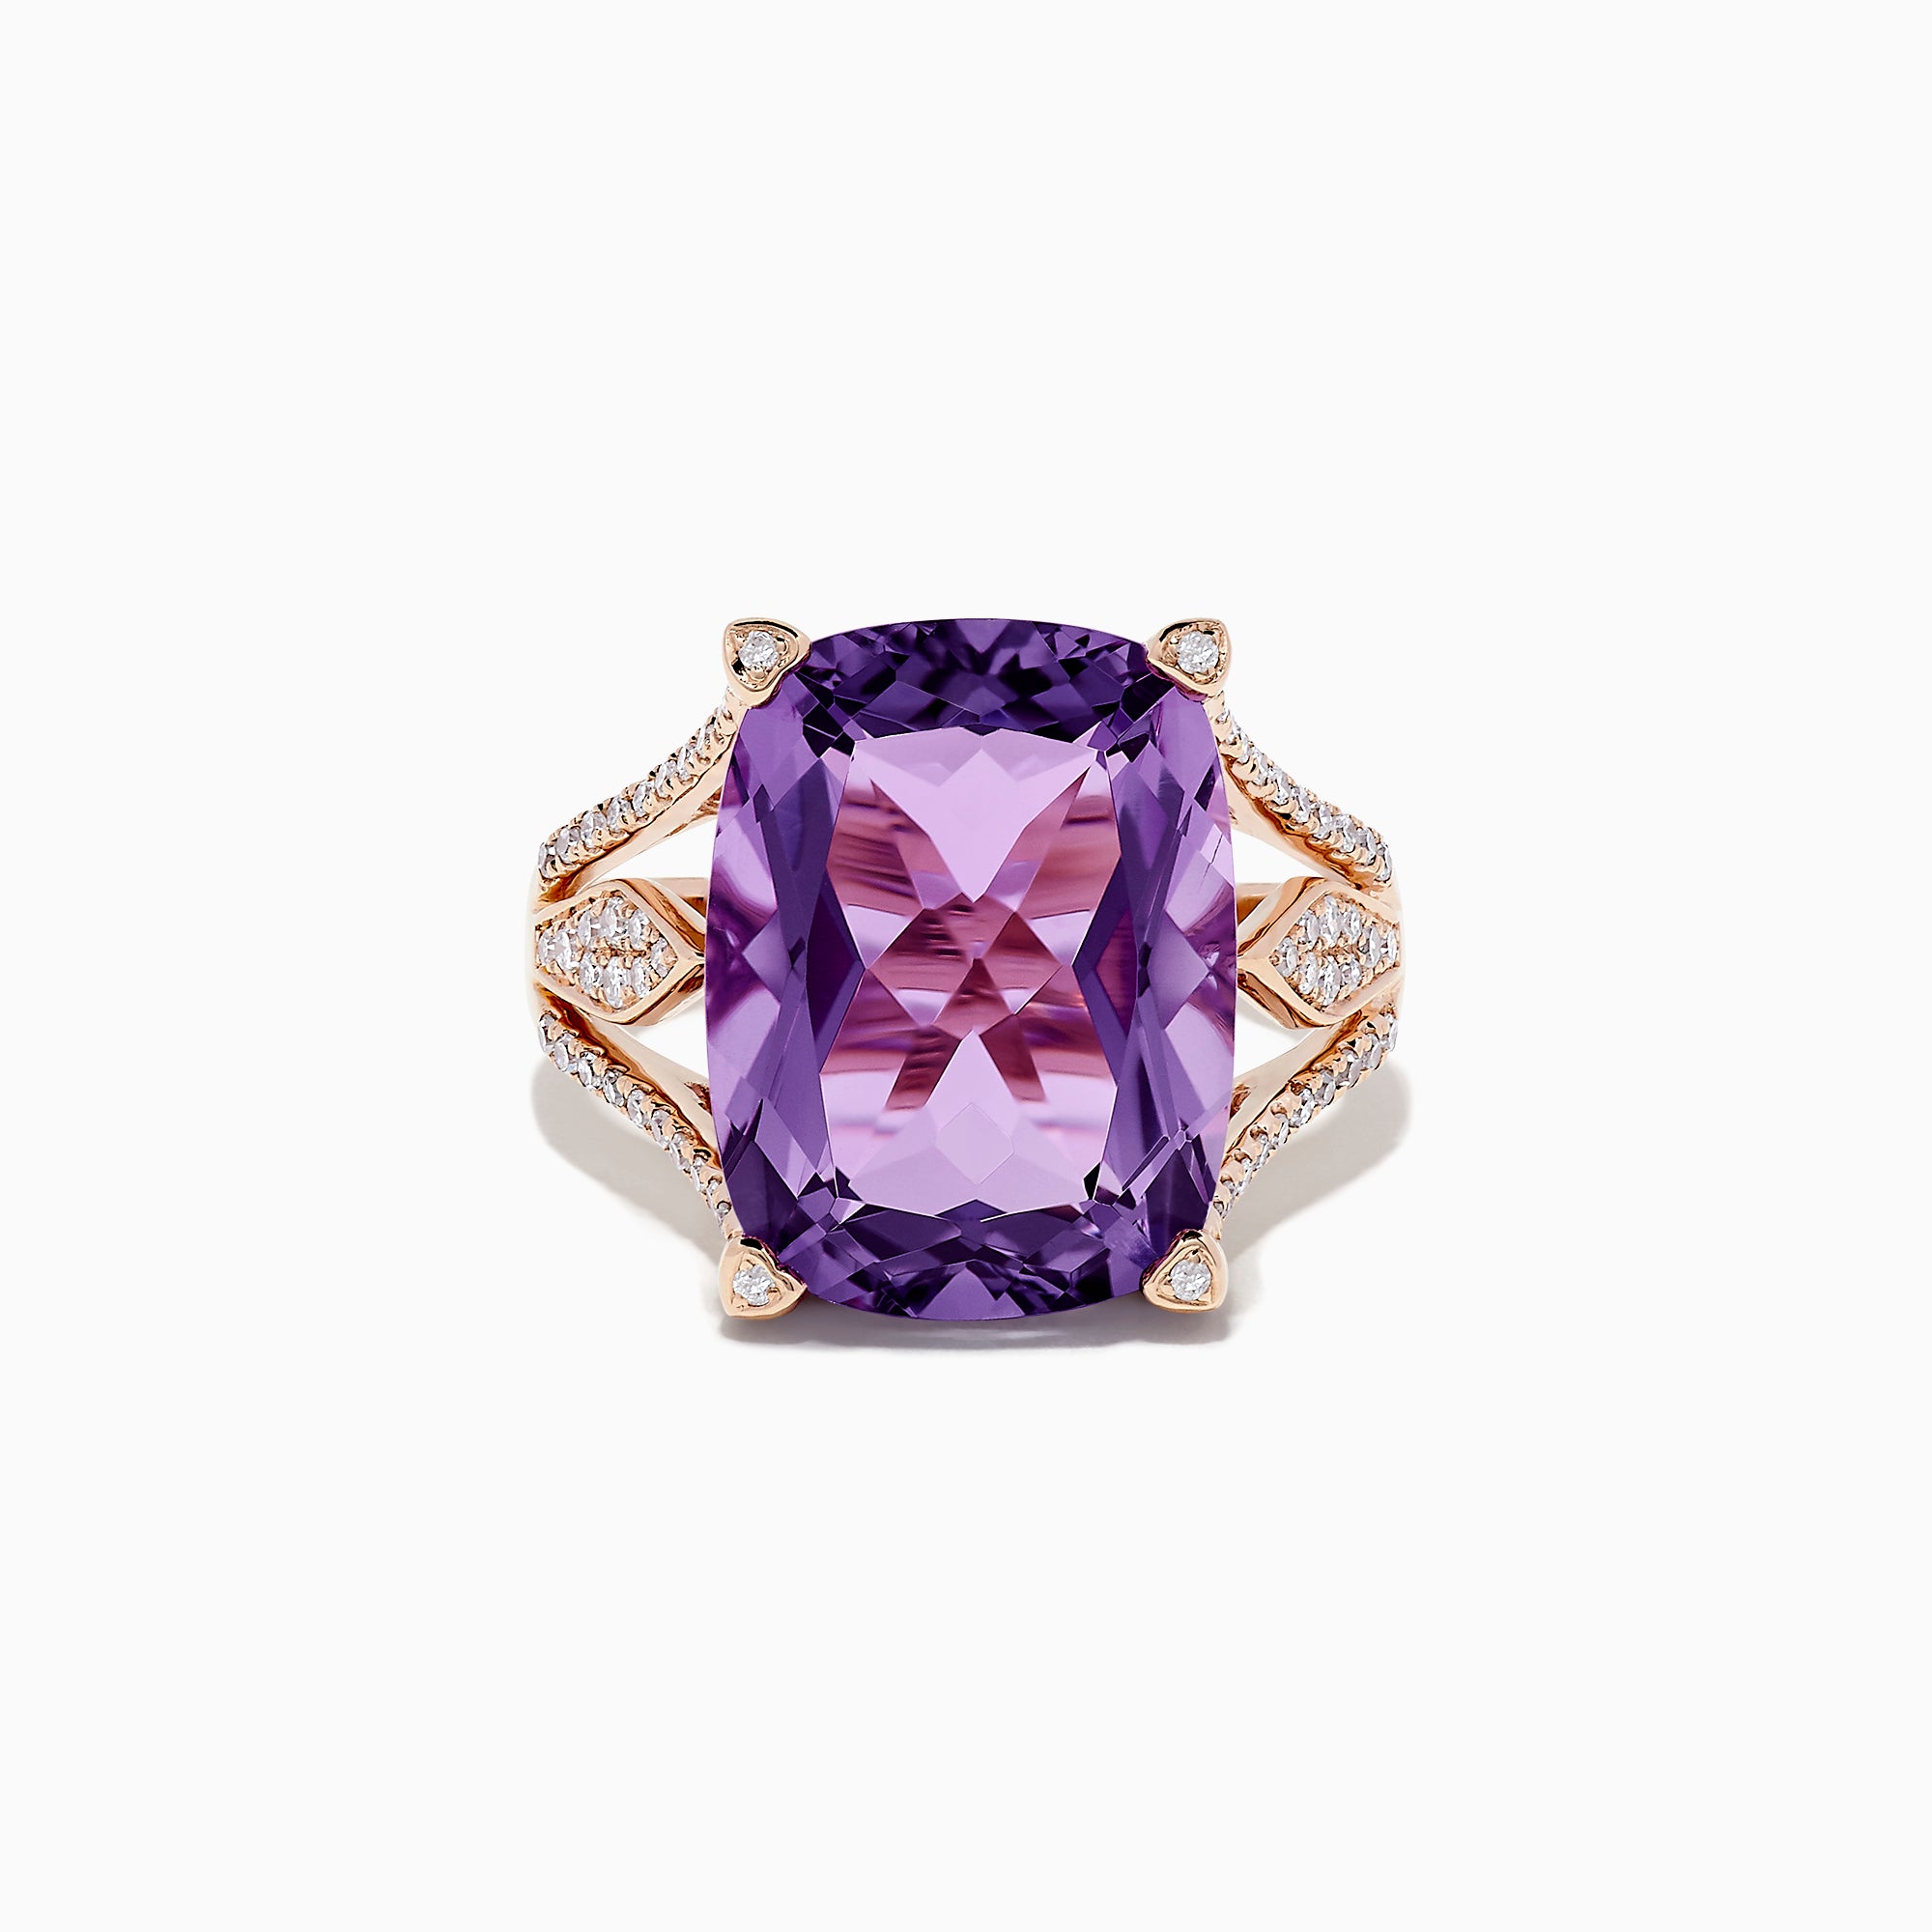 Effy 14K Rose Gold Amethyst and Diamond Cocktail Ring, 9.86 TCW ...